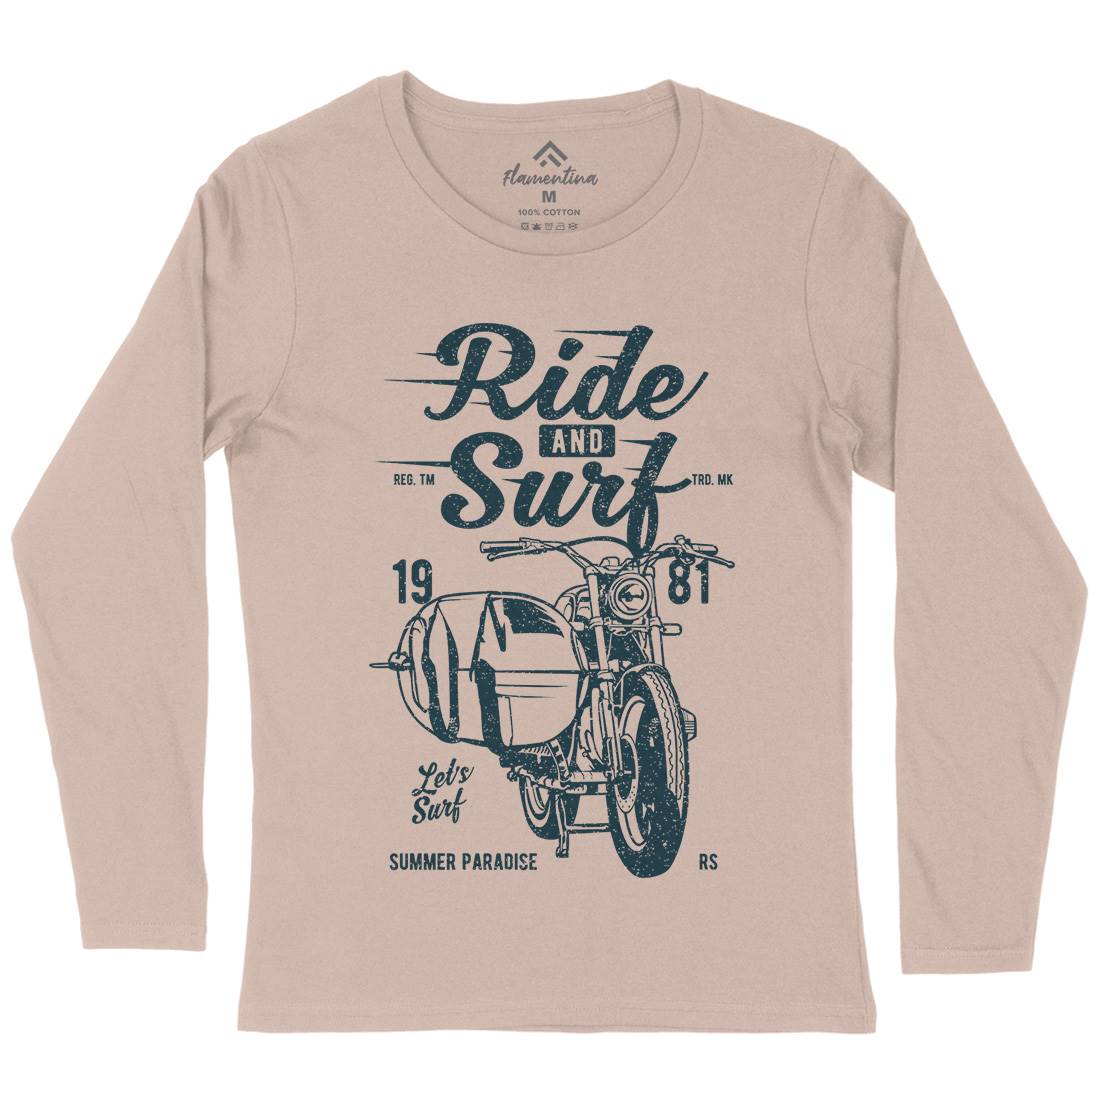 Ride And Womens Long Sleeve T-Shirt Surf A742